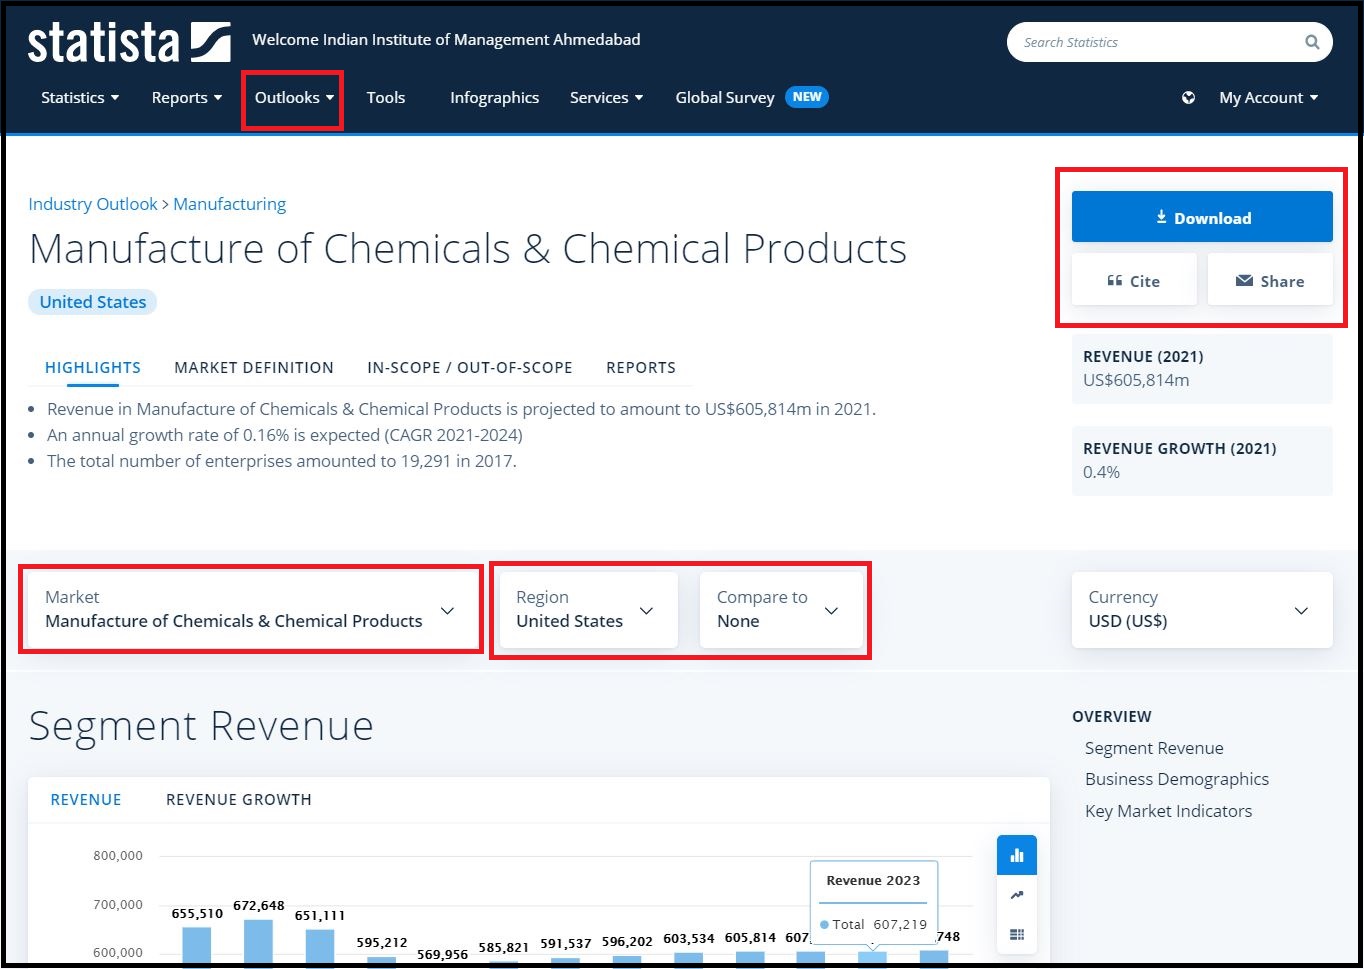 Statista then Select Outlook and Click on Industry Outlook then Click on Manufacturing then Click on Market then Manufacture of Chemicals & Chemical Products